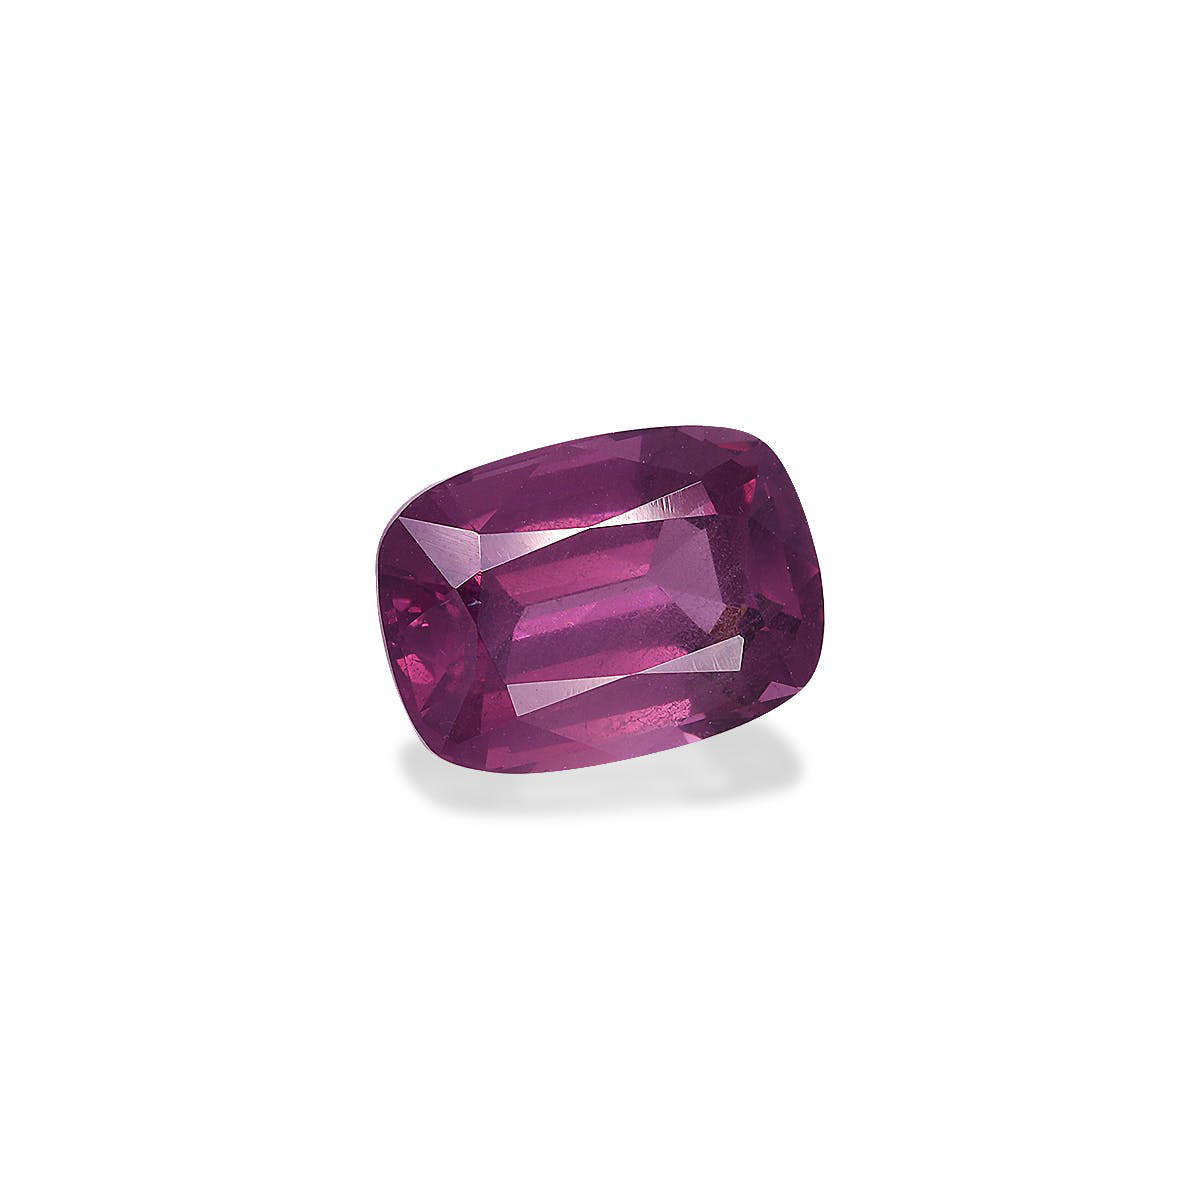 Picture of Grape Purple Spinel 2.98ct - 9x7mm (SP0415)